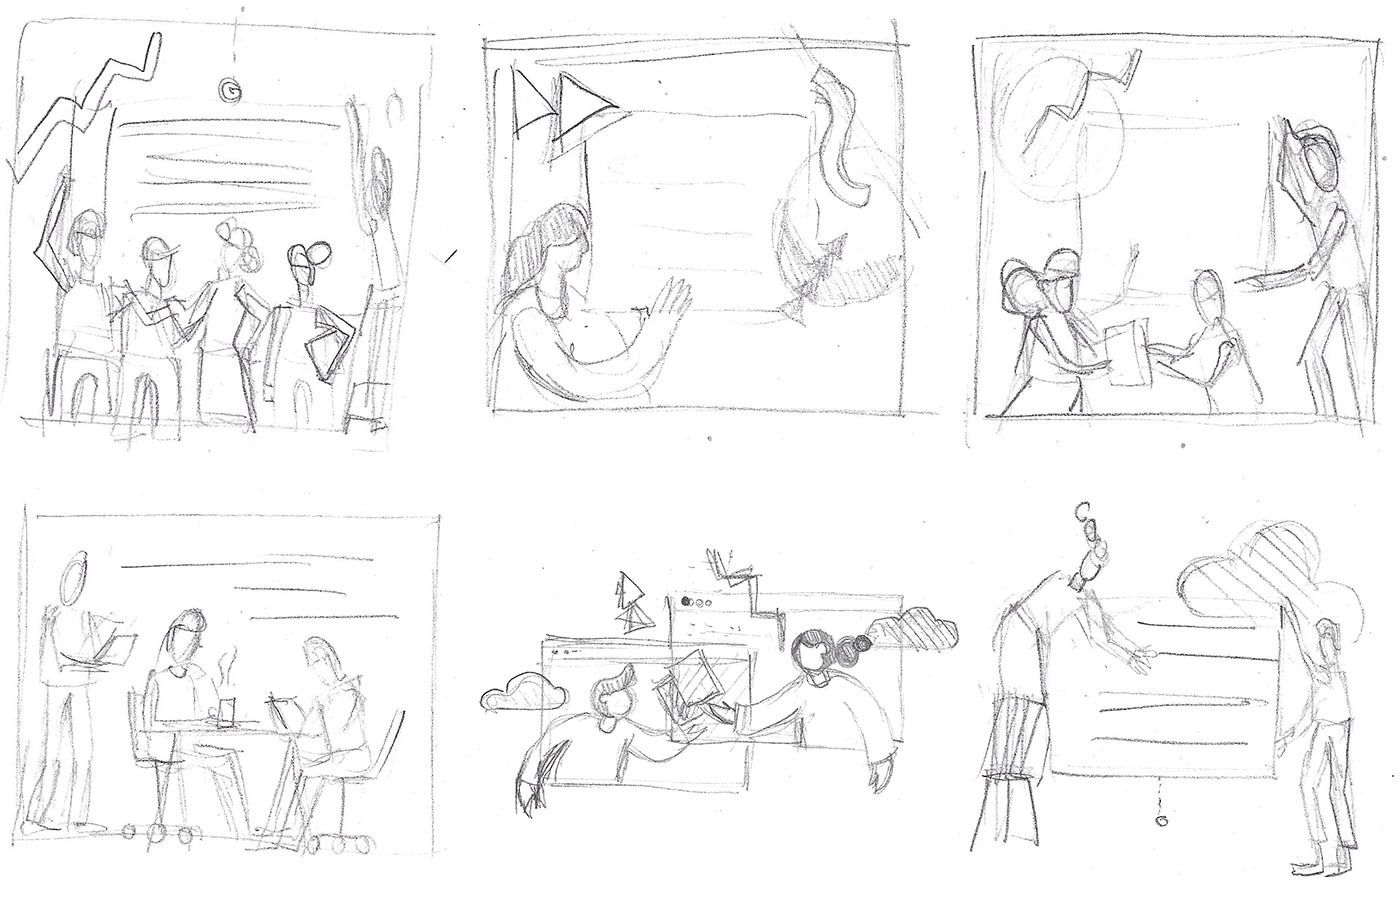 Preliminary sketches to explore some compositions for the EmC Instagram posts (or 'The Connected Culture' EmC book in a later stage of the project).